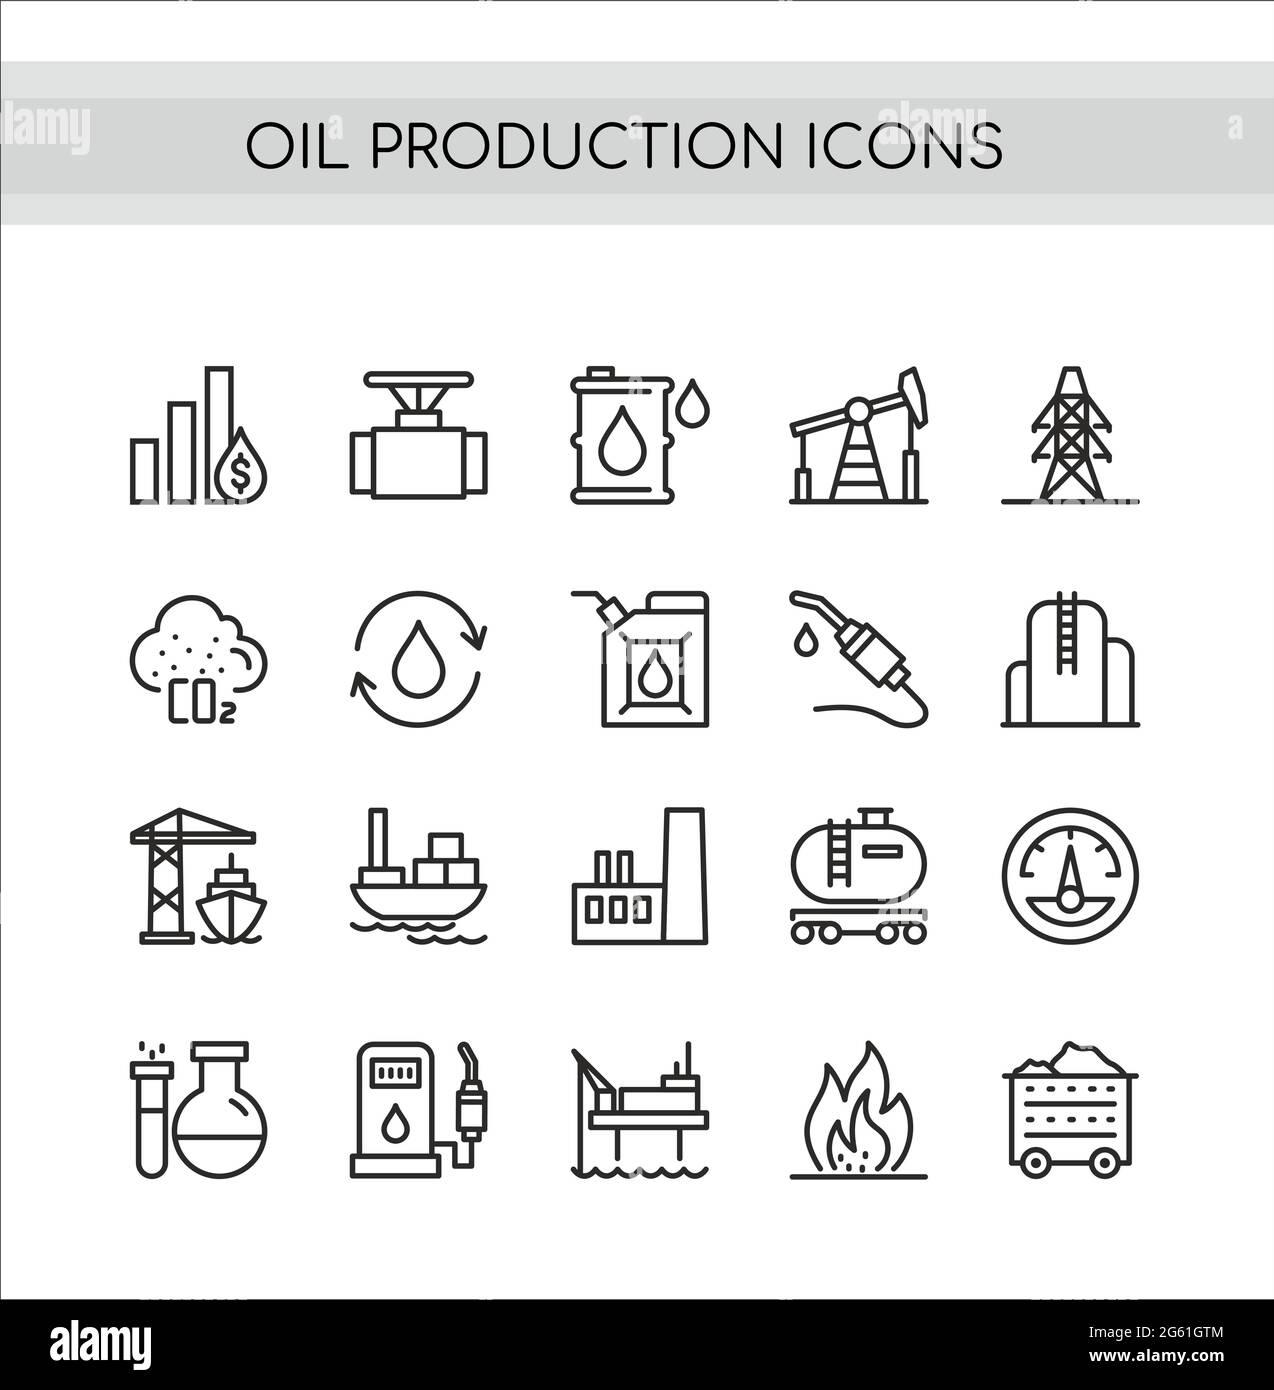 Oil production vector illustration set, flat thin line icons collection of oilfield extraction, transportation, refinery oil plant symbols Stock Vector